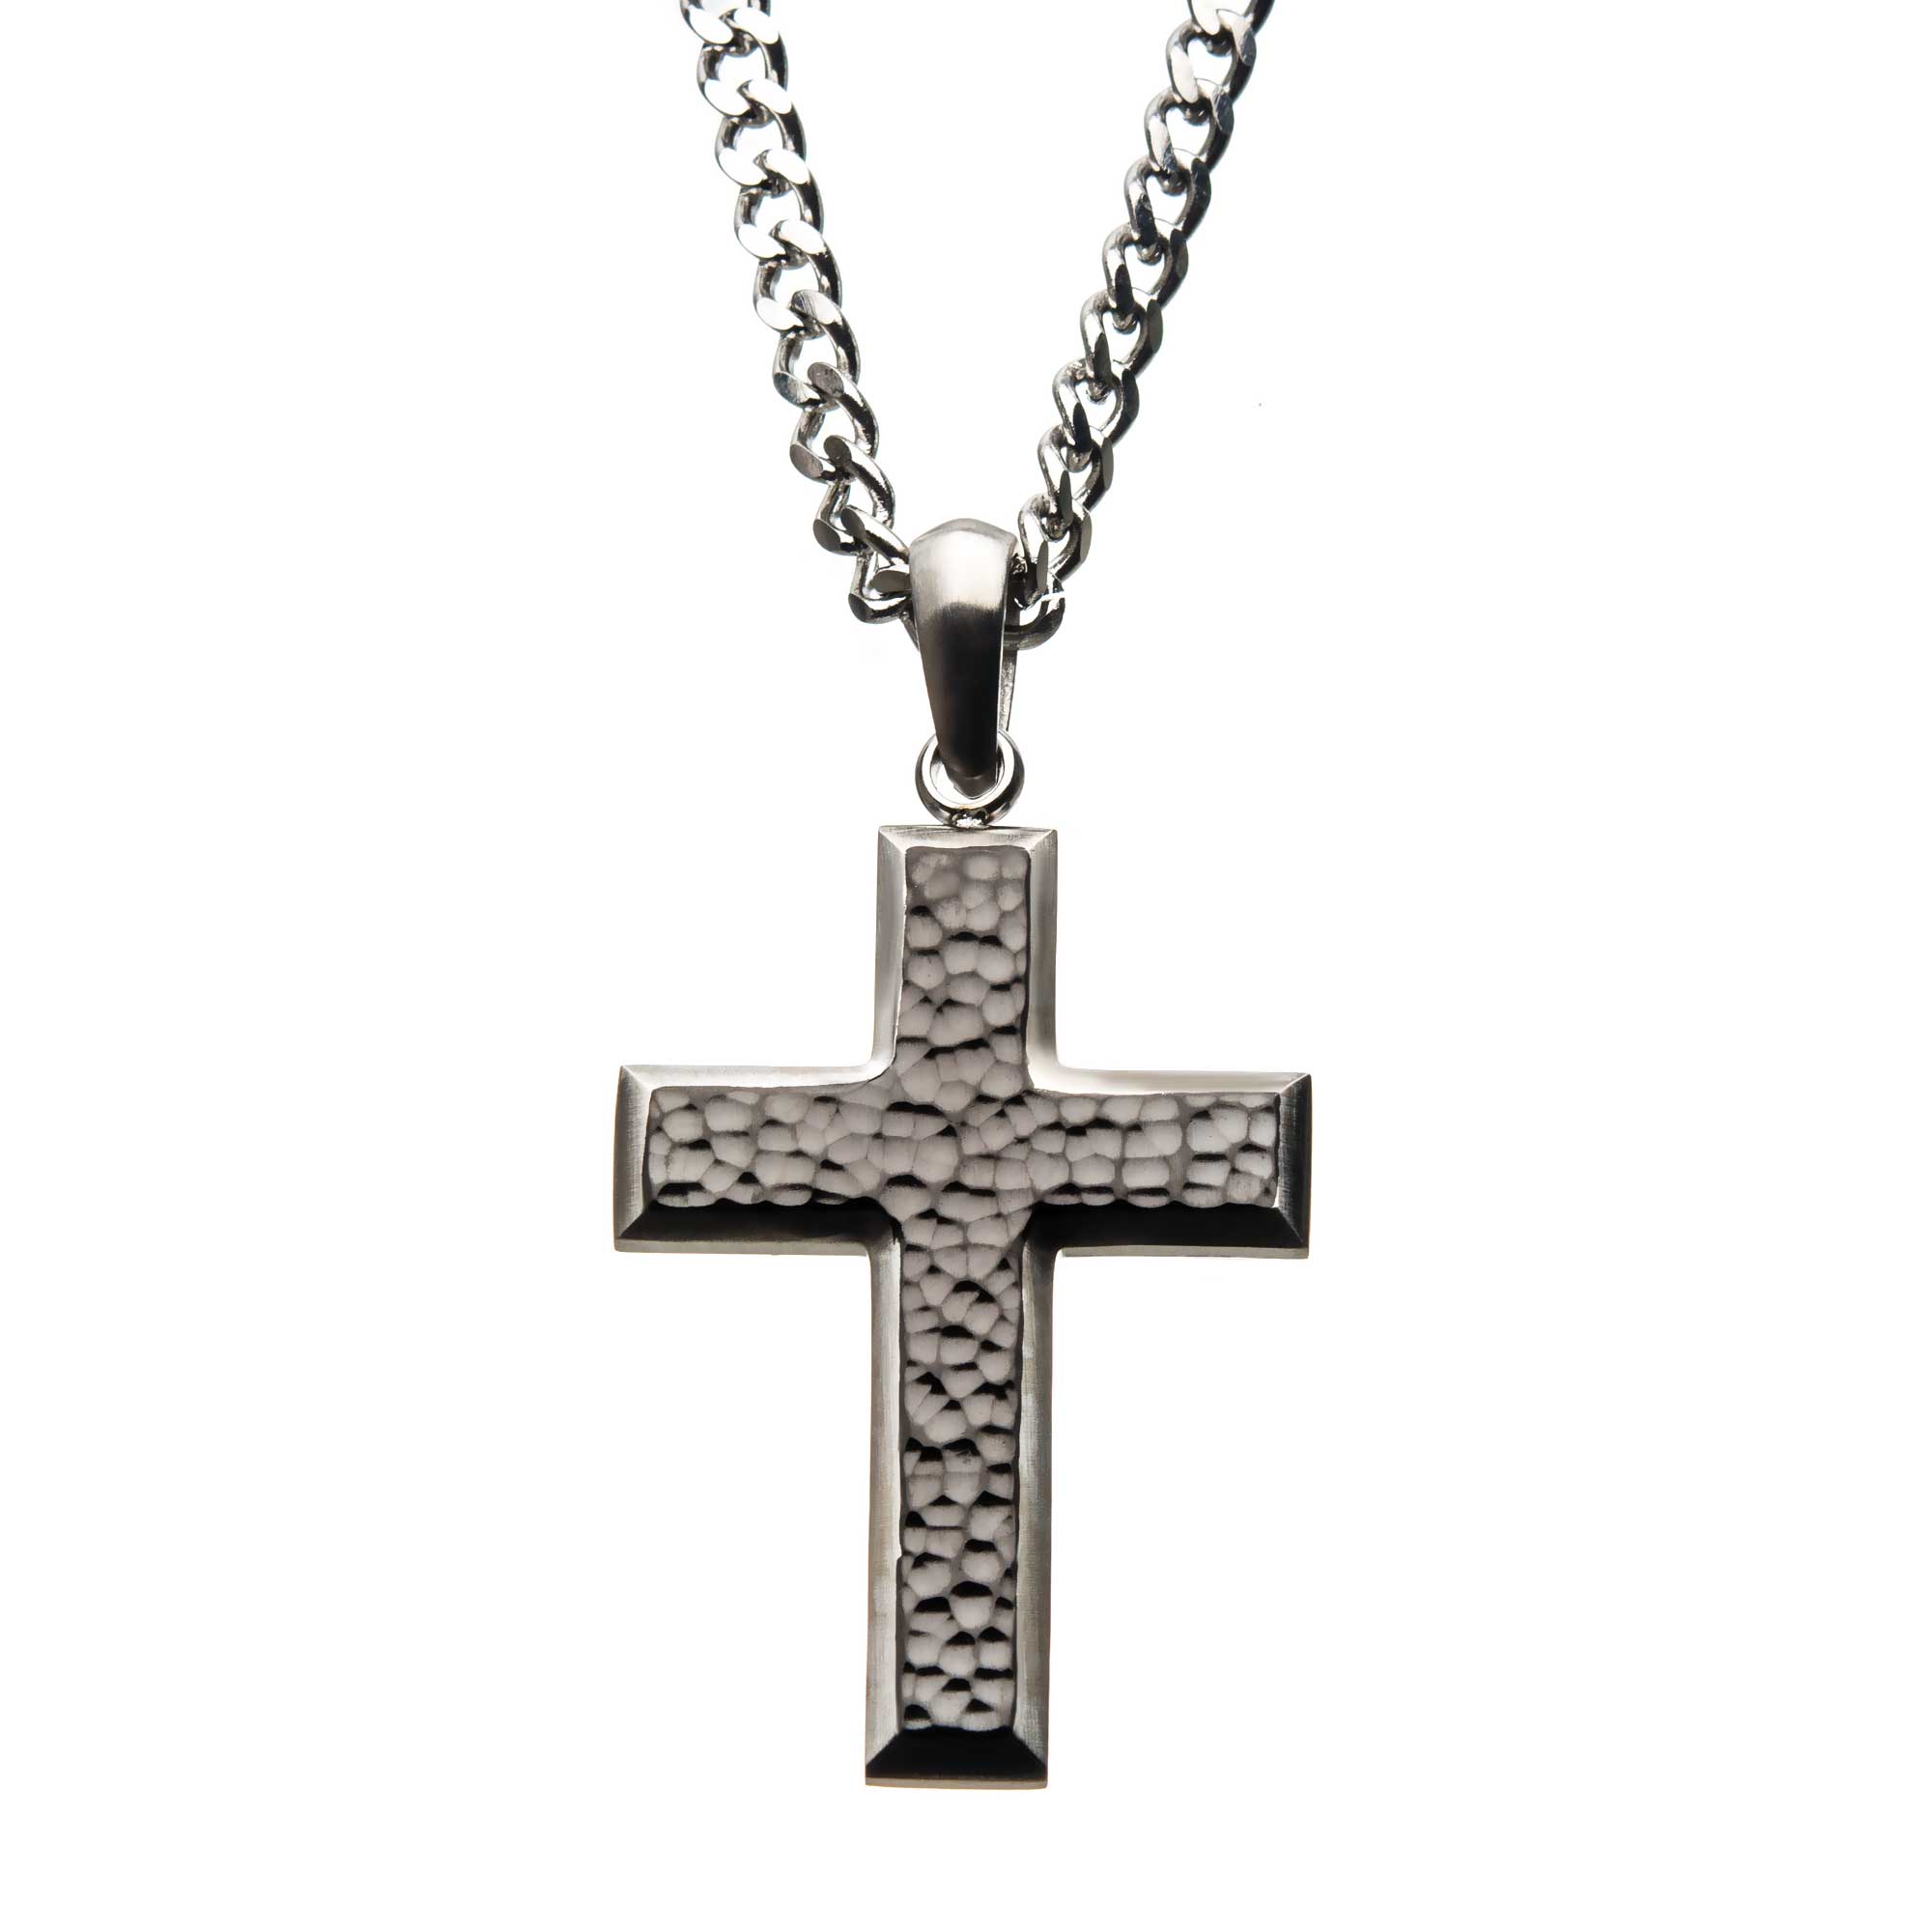 Stainless Steel Hammered Cross Pendant with Chain Ken Walker Jewelers Gig Harbor, WA